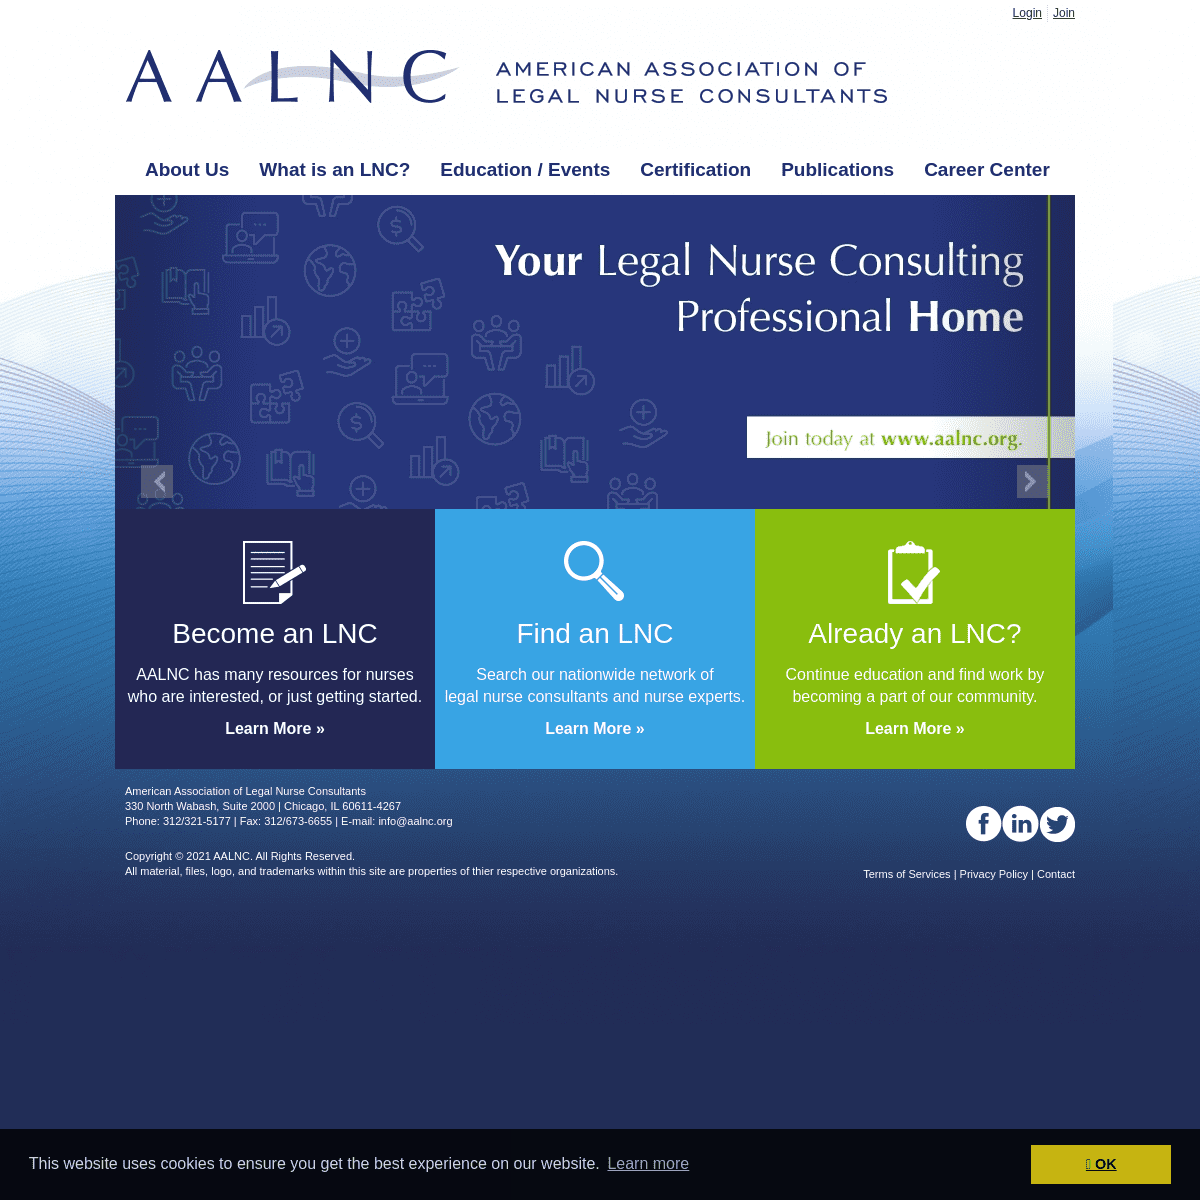 A complete backup of https://aalnc.org